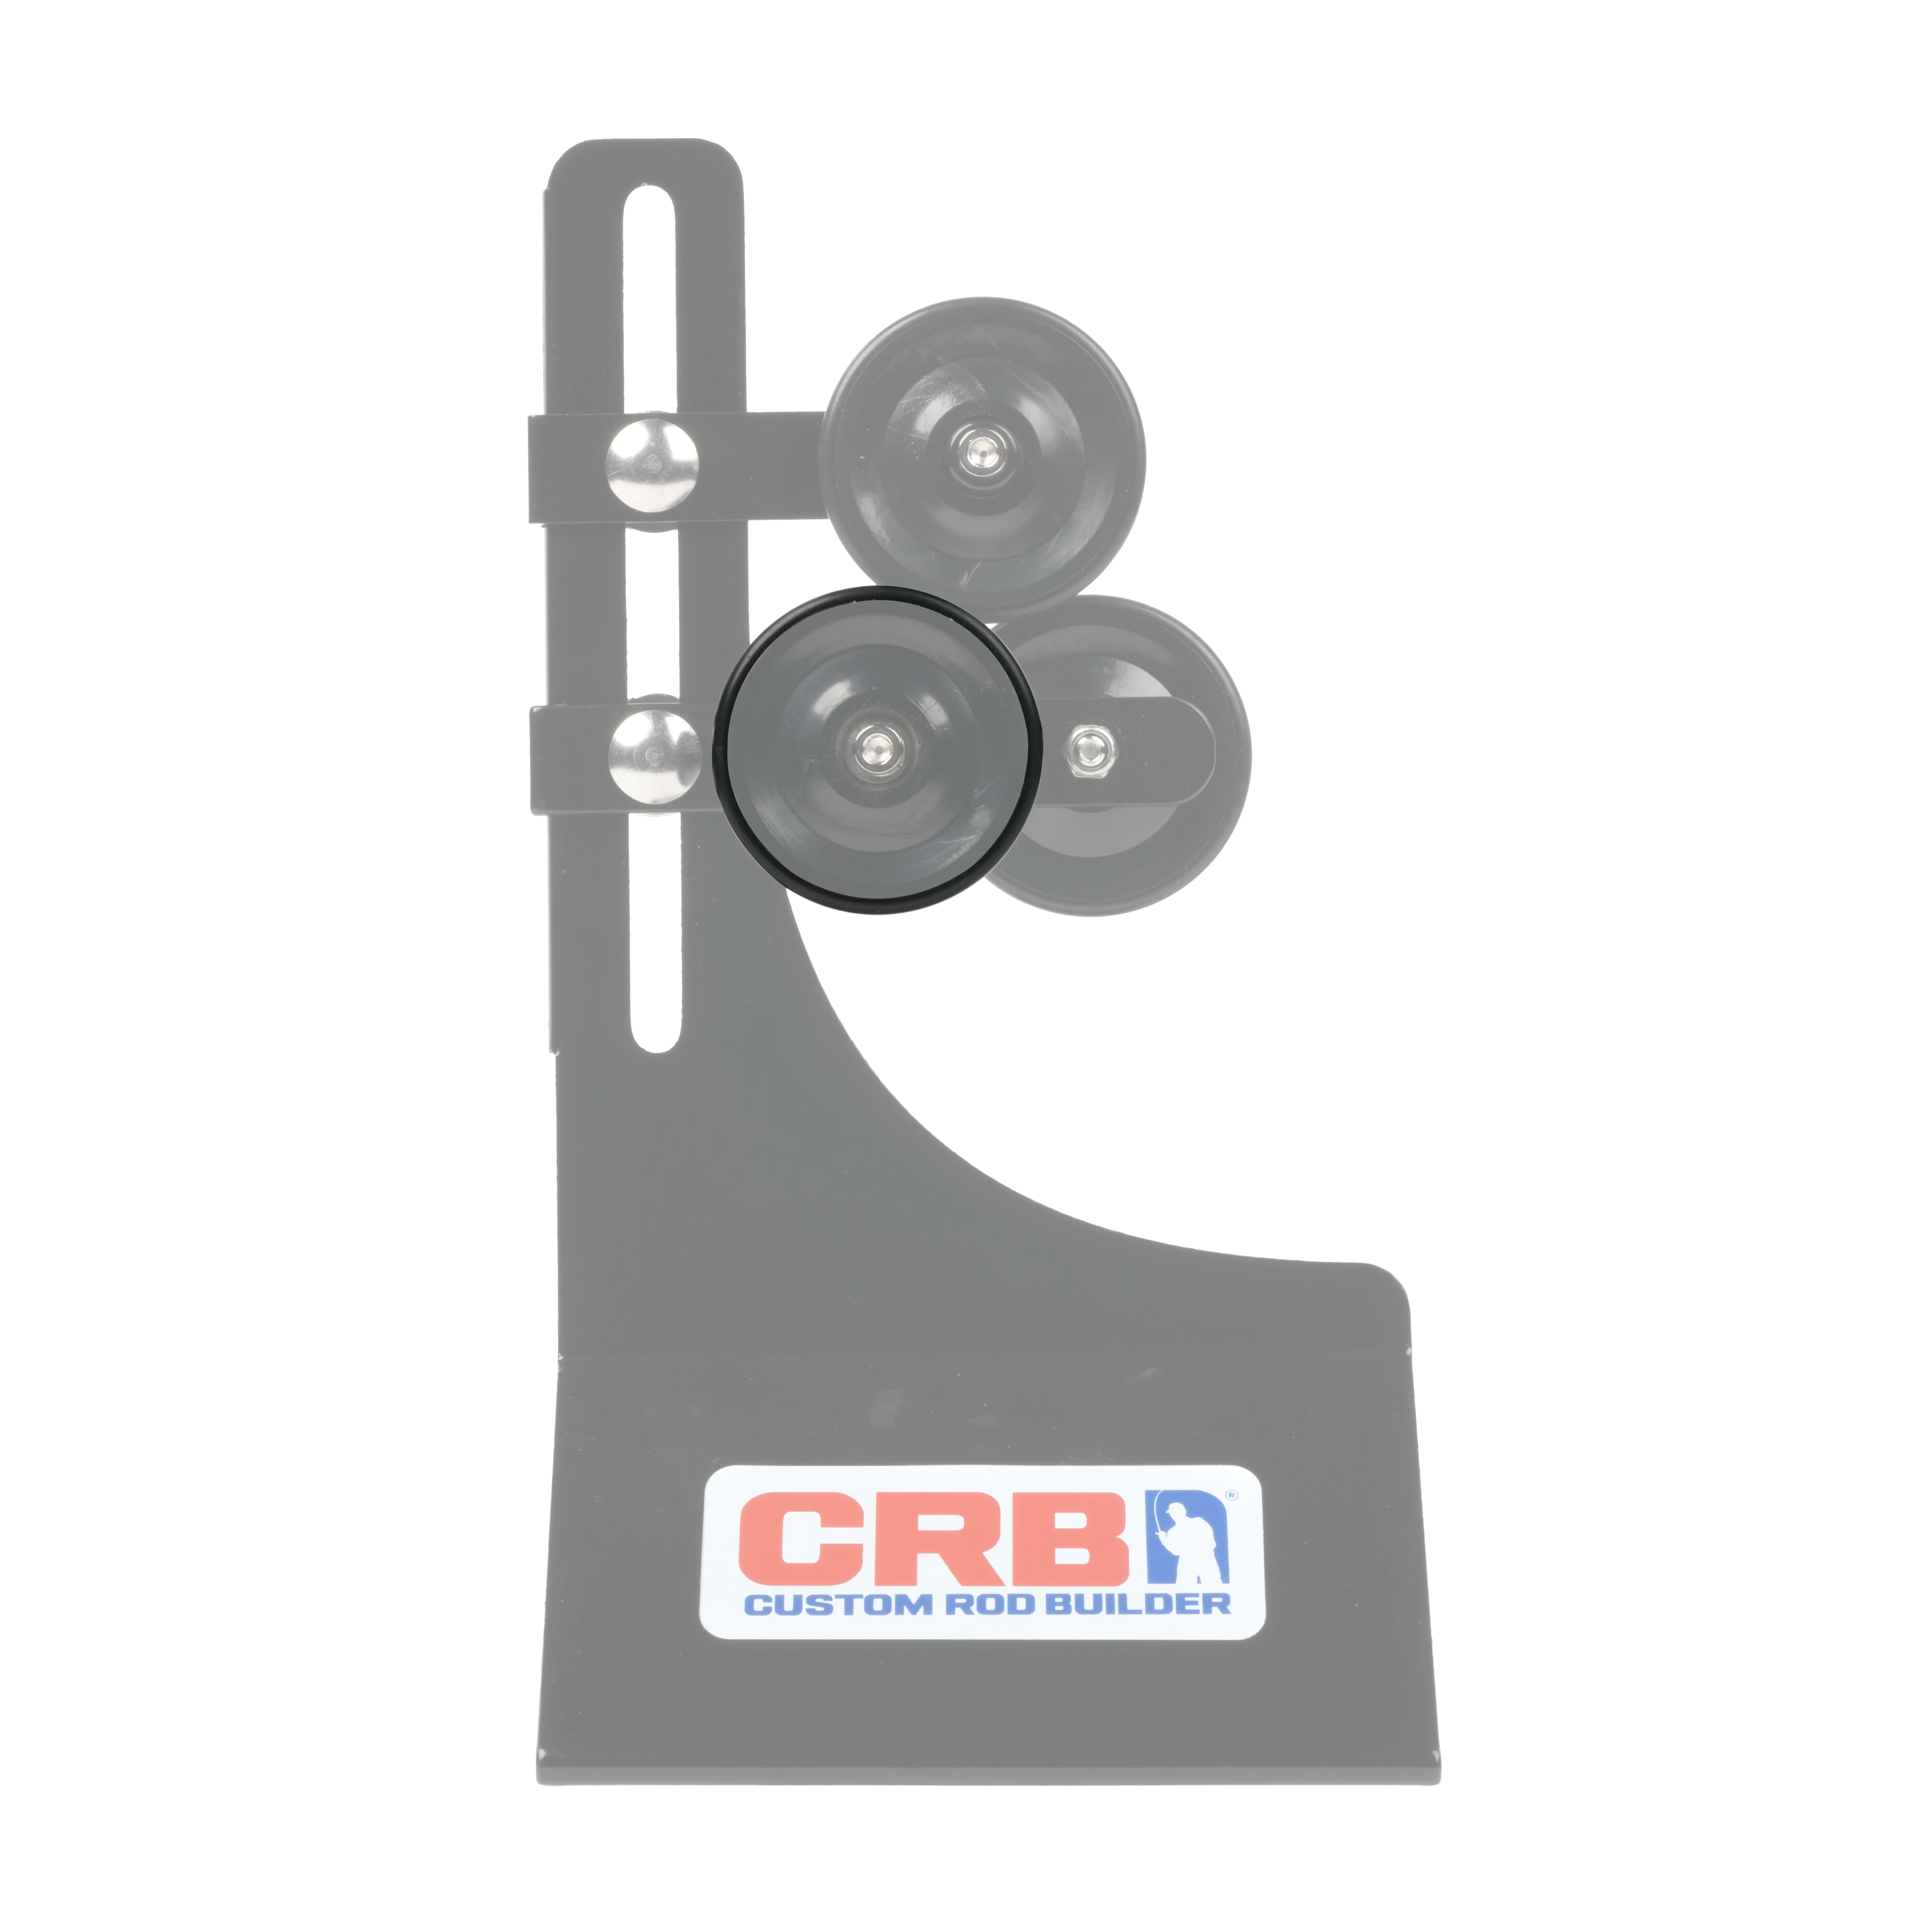 Spare O-Rings for CRB Roller Stand, 3-Pack